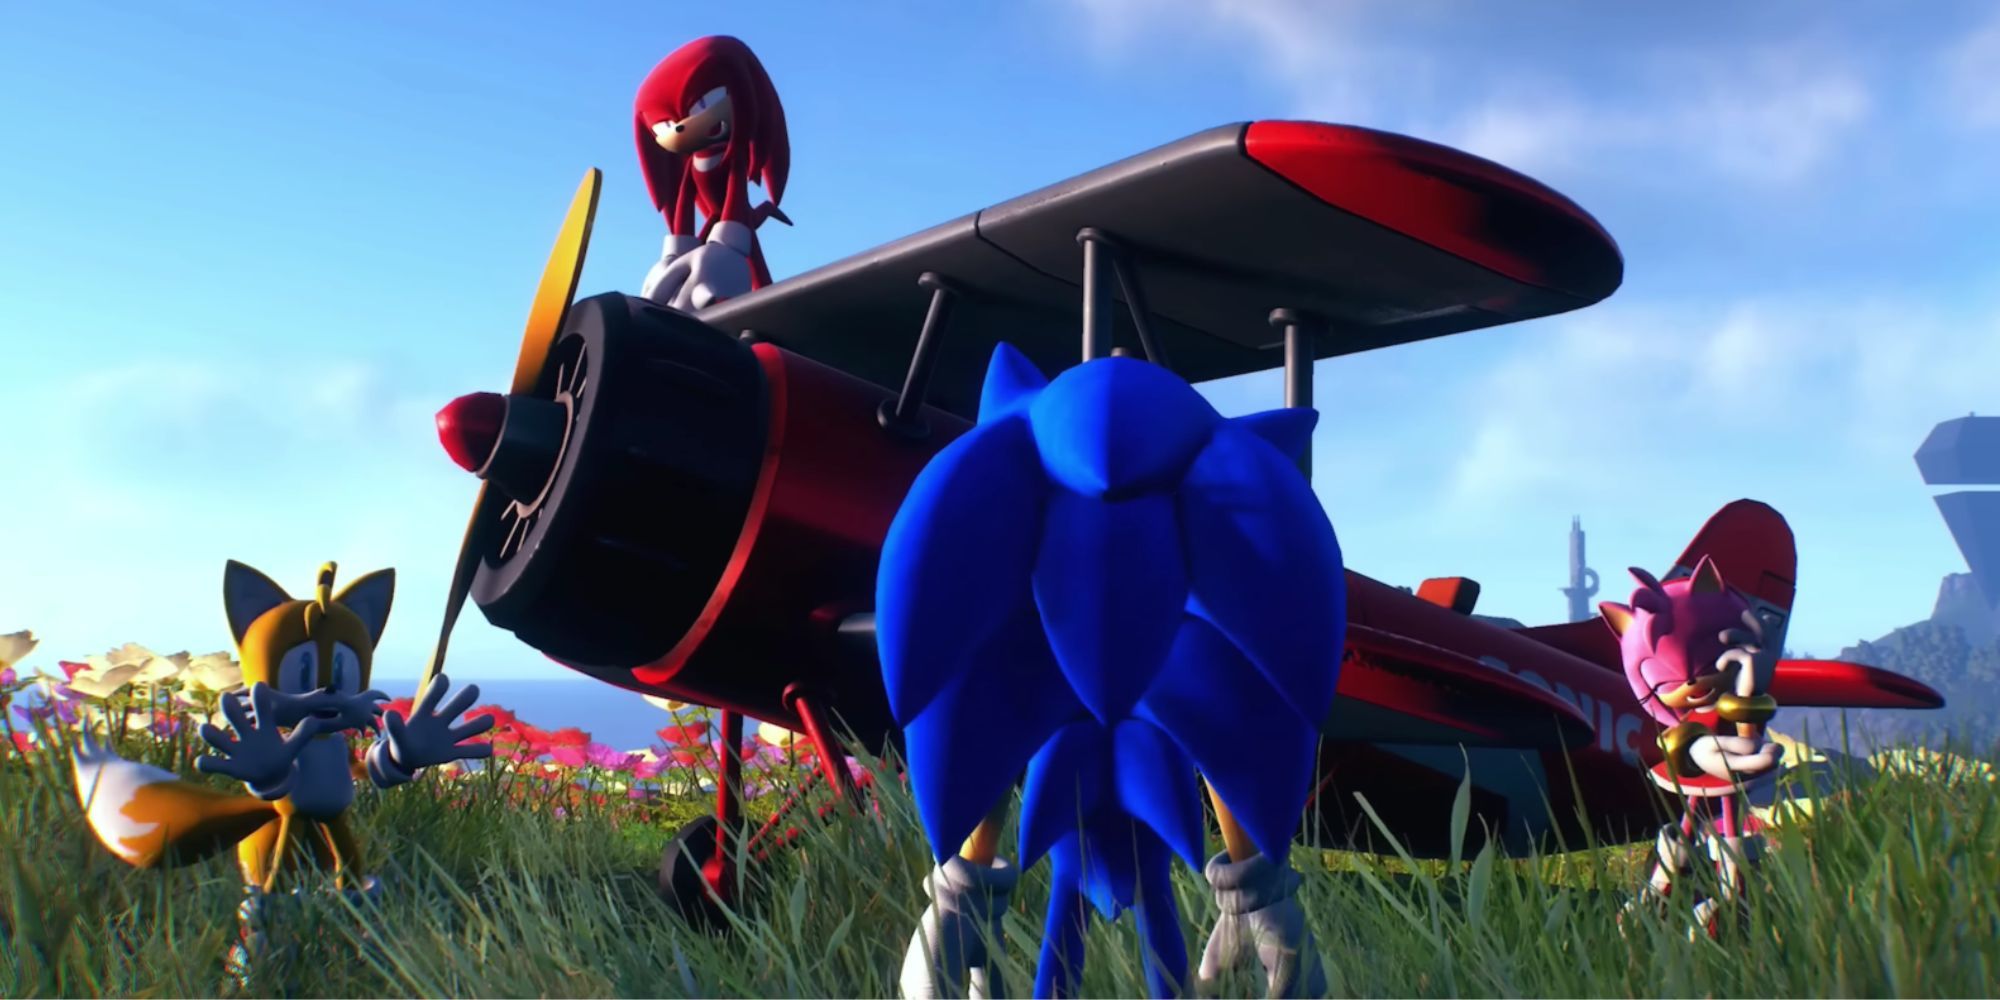 Sonic Frontiers' Free DLC Roadmap Includes New Playable Characters And  Story Content